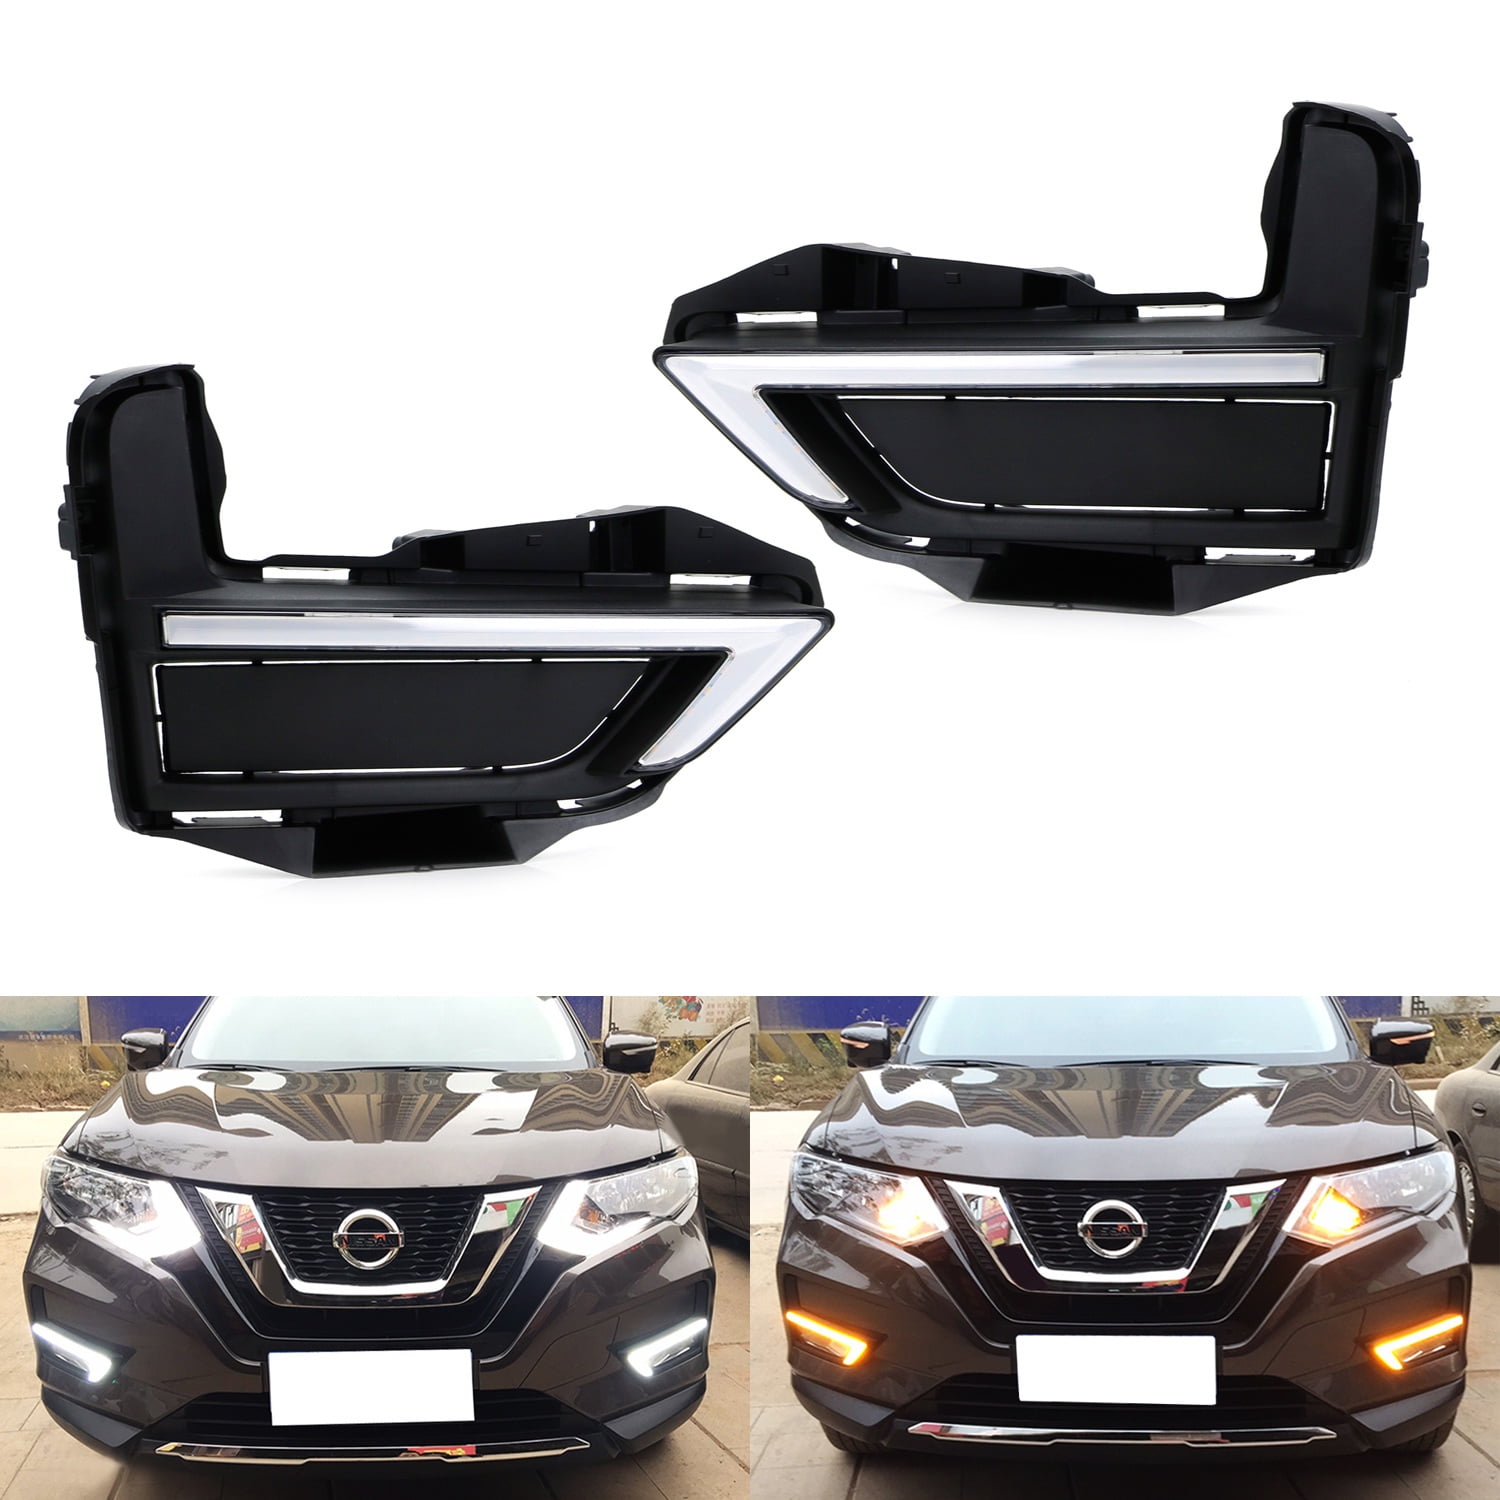 For Nissan Rogue 2017 2018 2019 Fog Light Replacement Daytime Running Lights DRL Amber Turn Signal Lamps Rogue LED Daylight with Bezel 